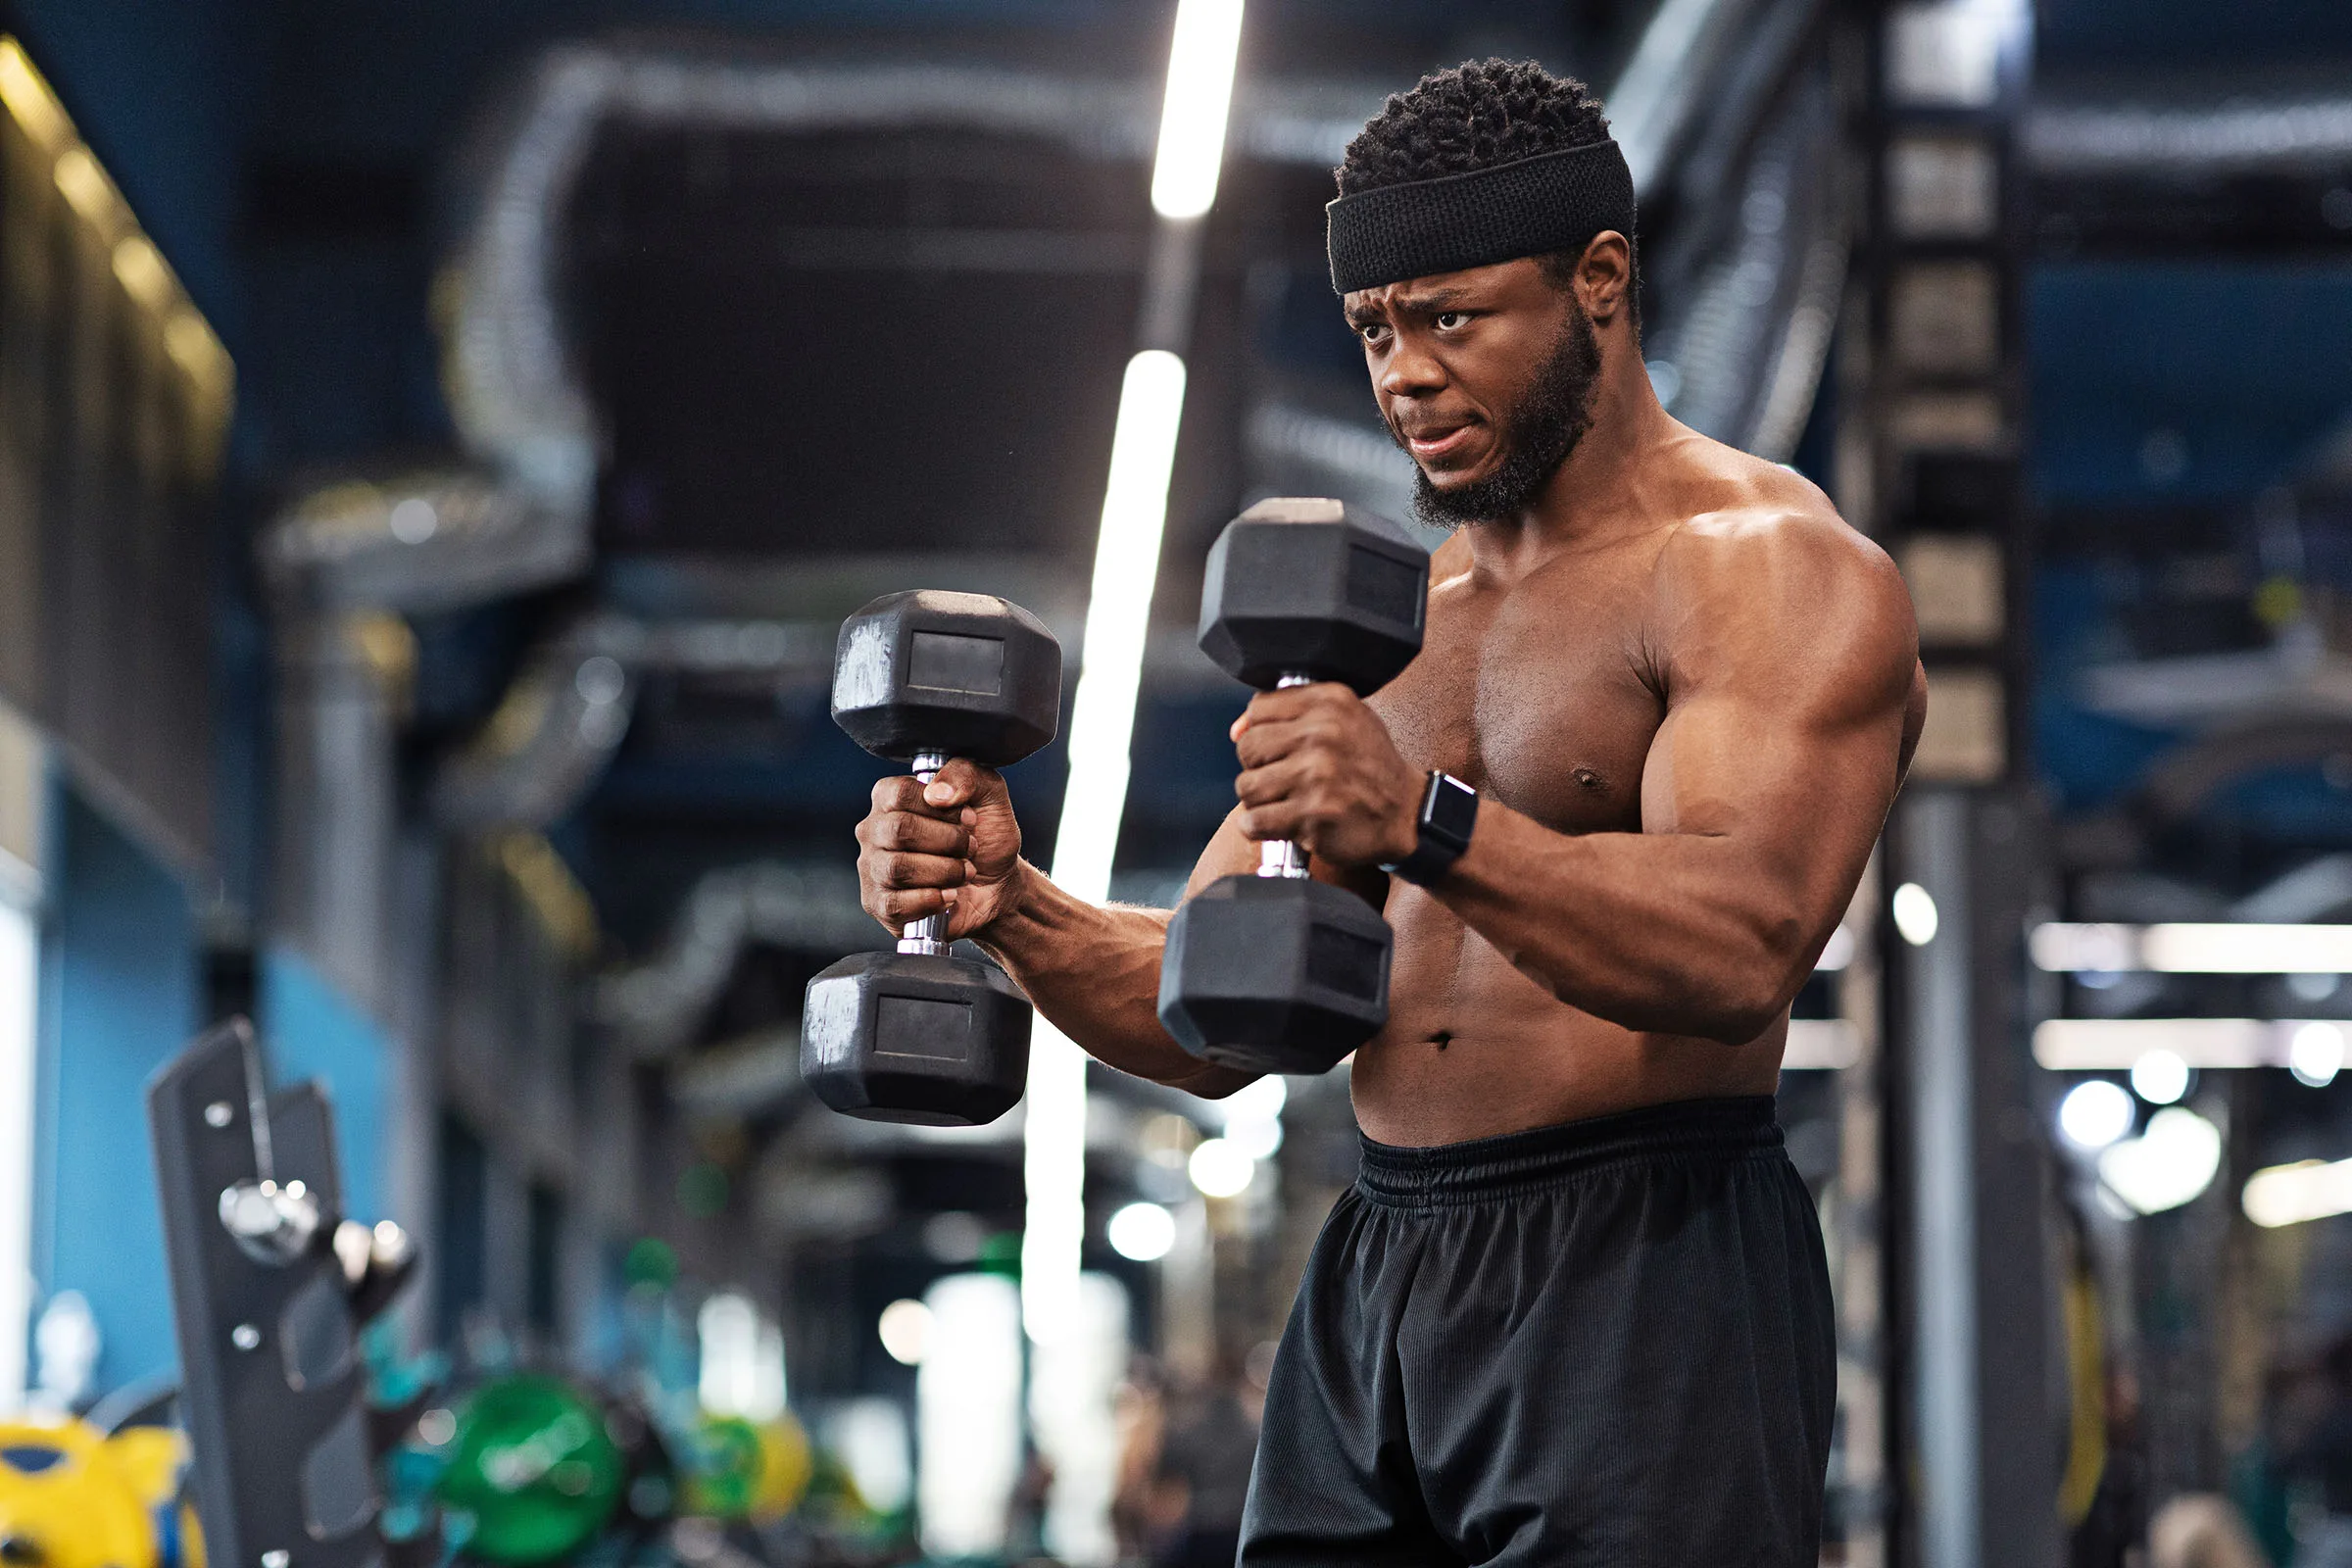 What are Hammer Curls?